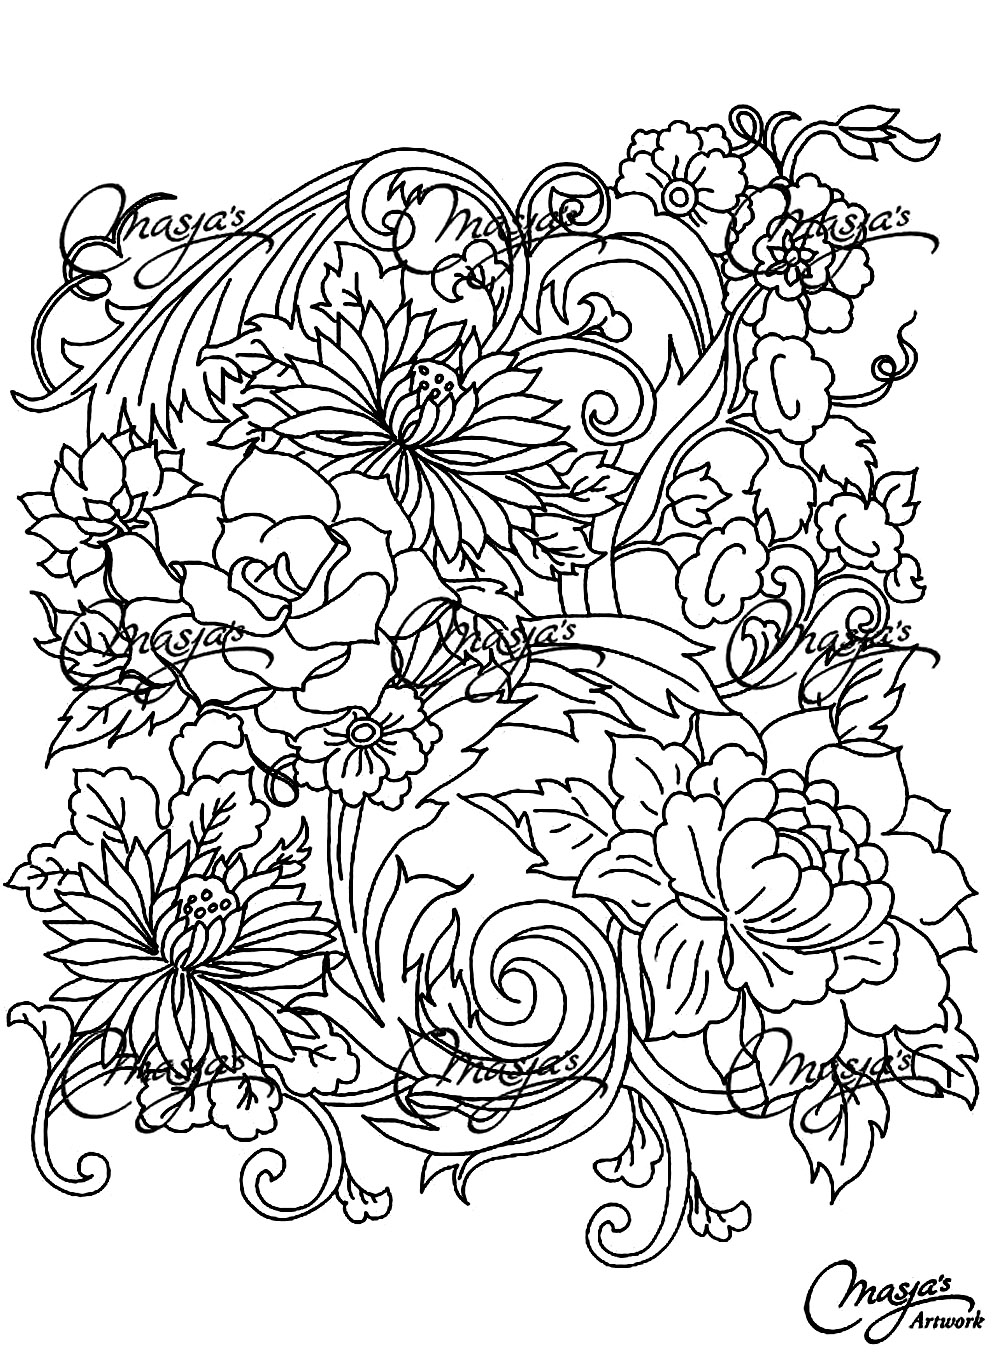 Grayscale Flowers Coloring Book For Adults: 40 Beautiful Floral Designs on  Black Backed Pages for Mindfulness, Relaxation and Stress Relief (Grayscale  Coloring Books For Adults): Bloomfield, C A: 9798375953731: Amazon.com:  Books